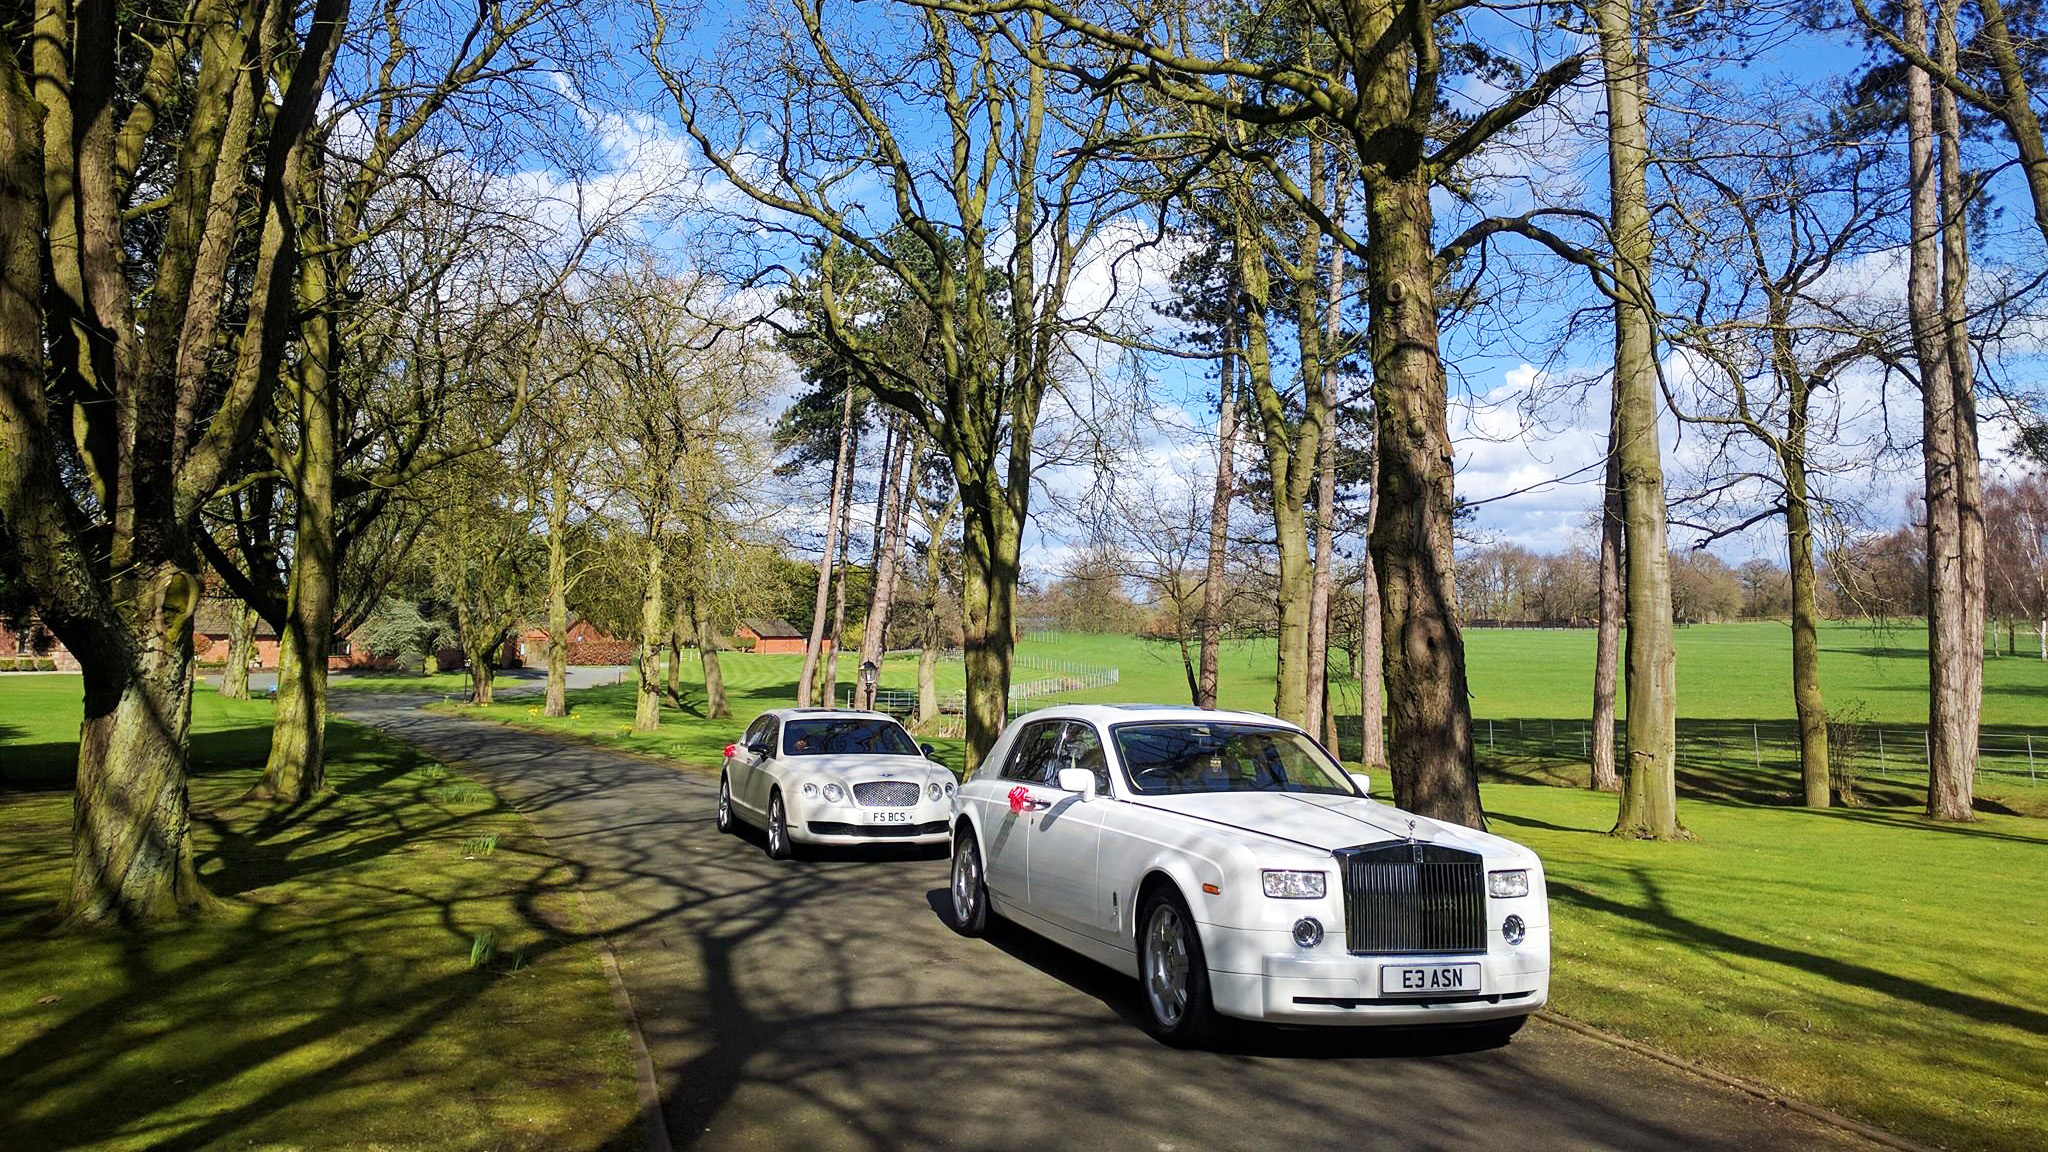 A white modern Rolls-Royce phantom followed by a white limousine decorated with matching red bows entering a long drive of a wedding venue.